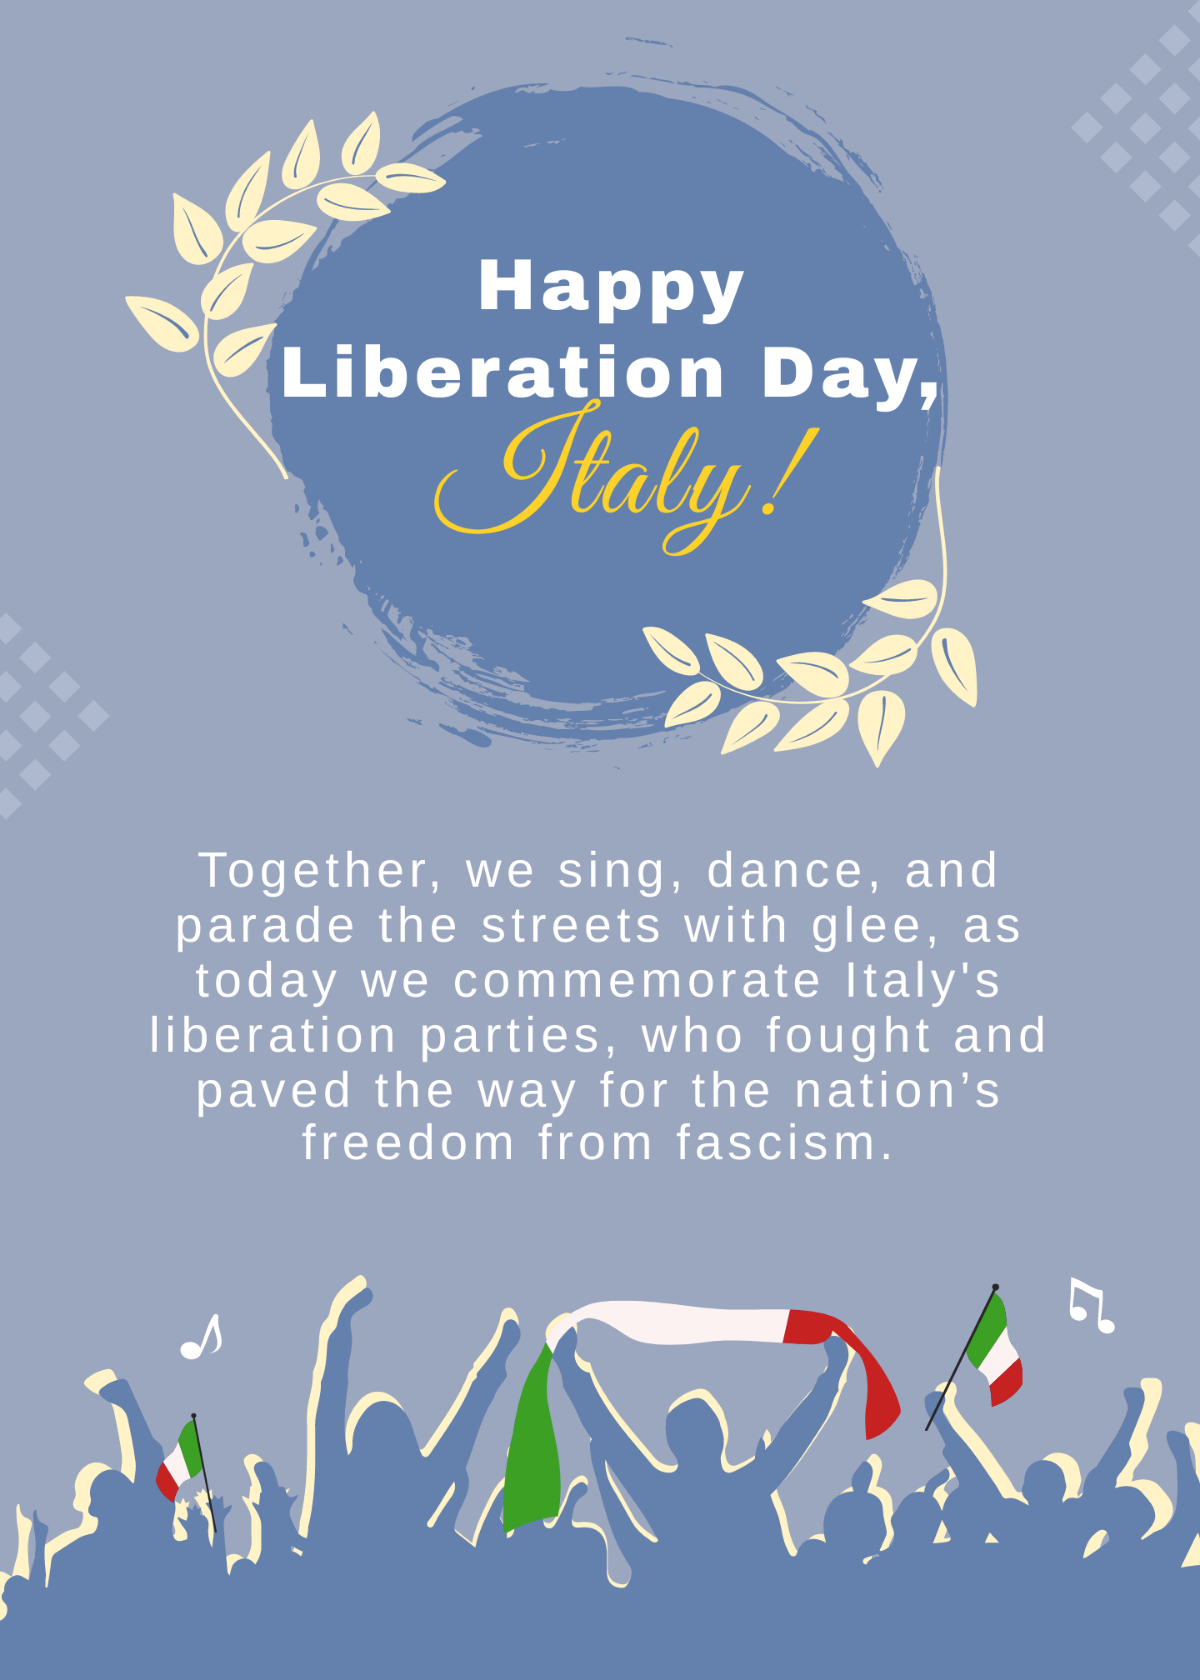 Italy Liberation Day Greeting Card